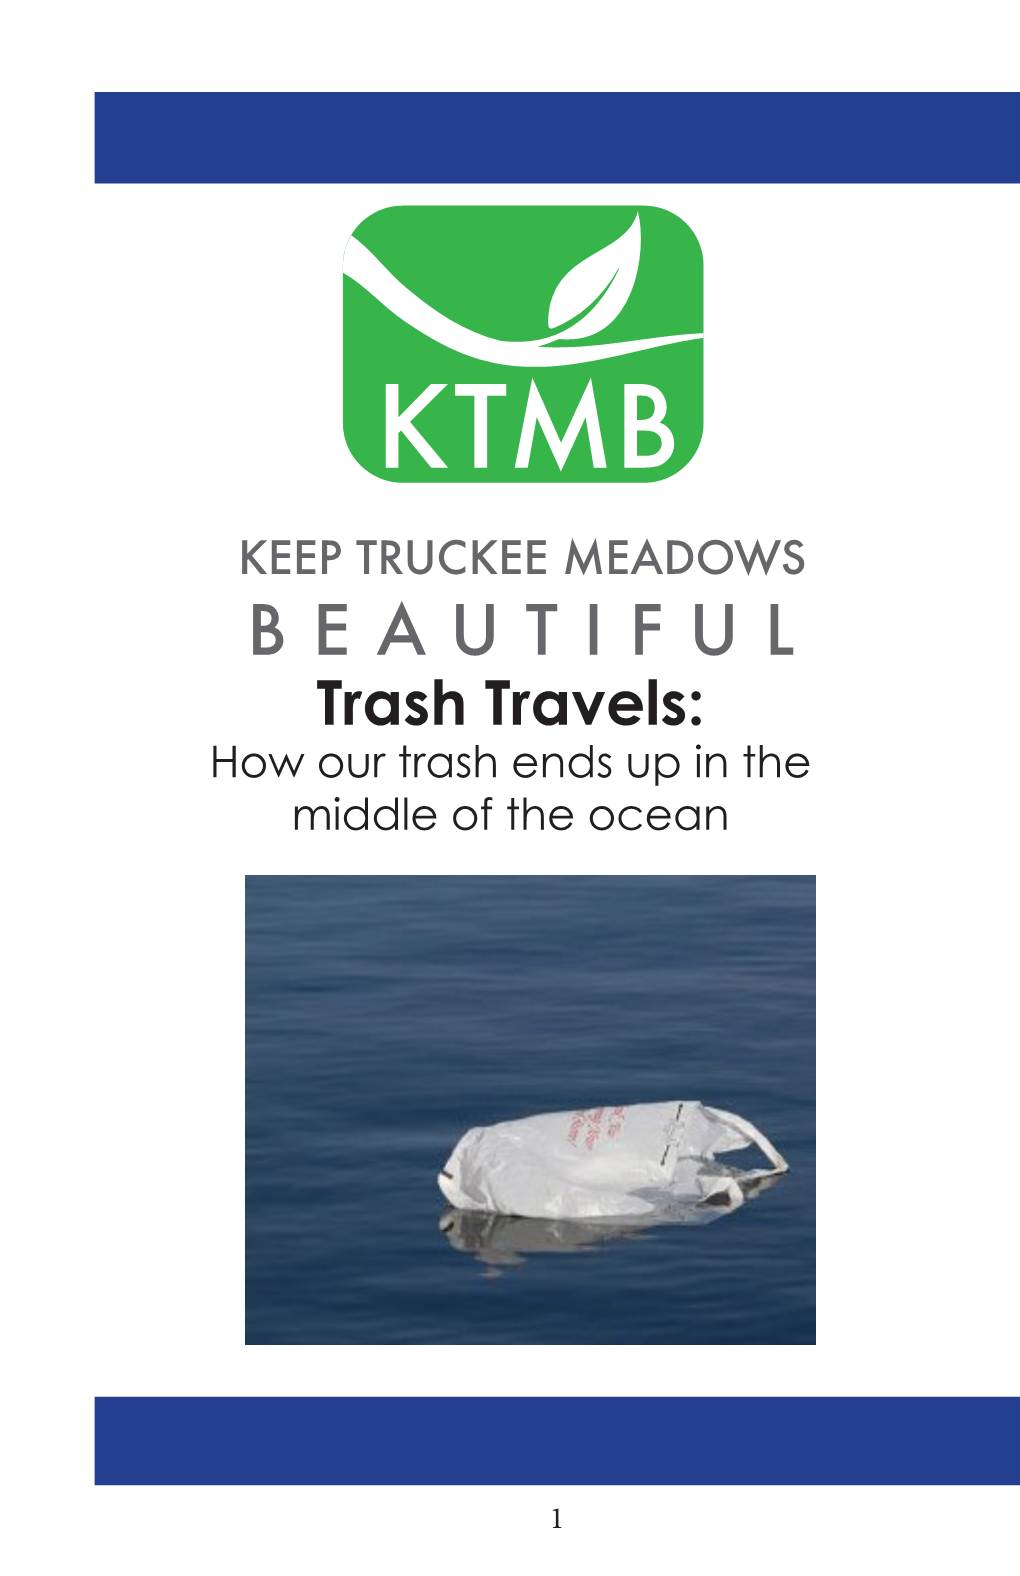 Trash Travels: How Our Trash Ends up in the Middle of the Ocean